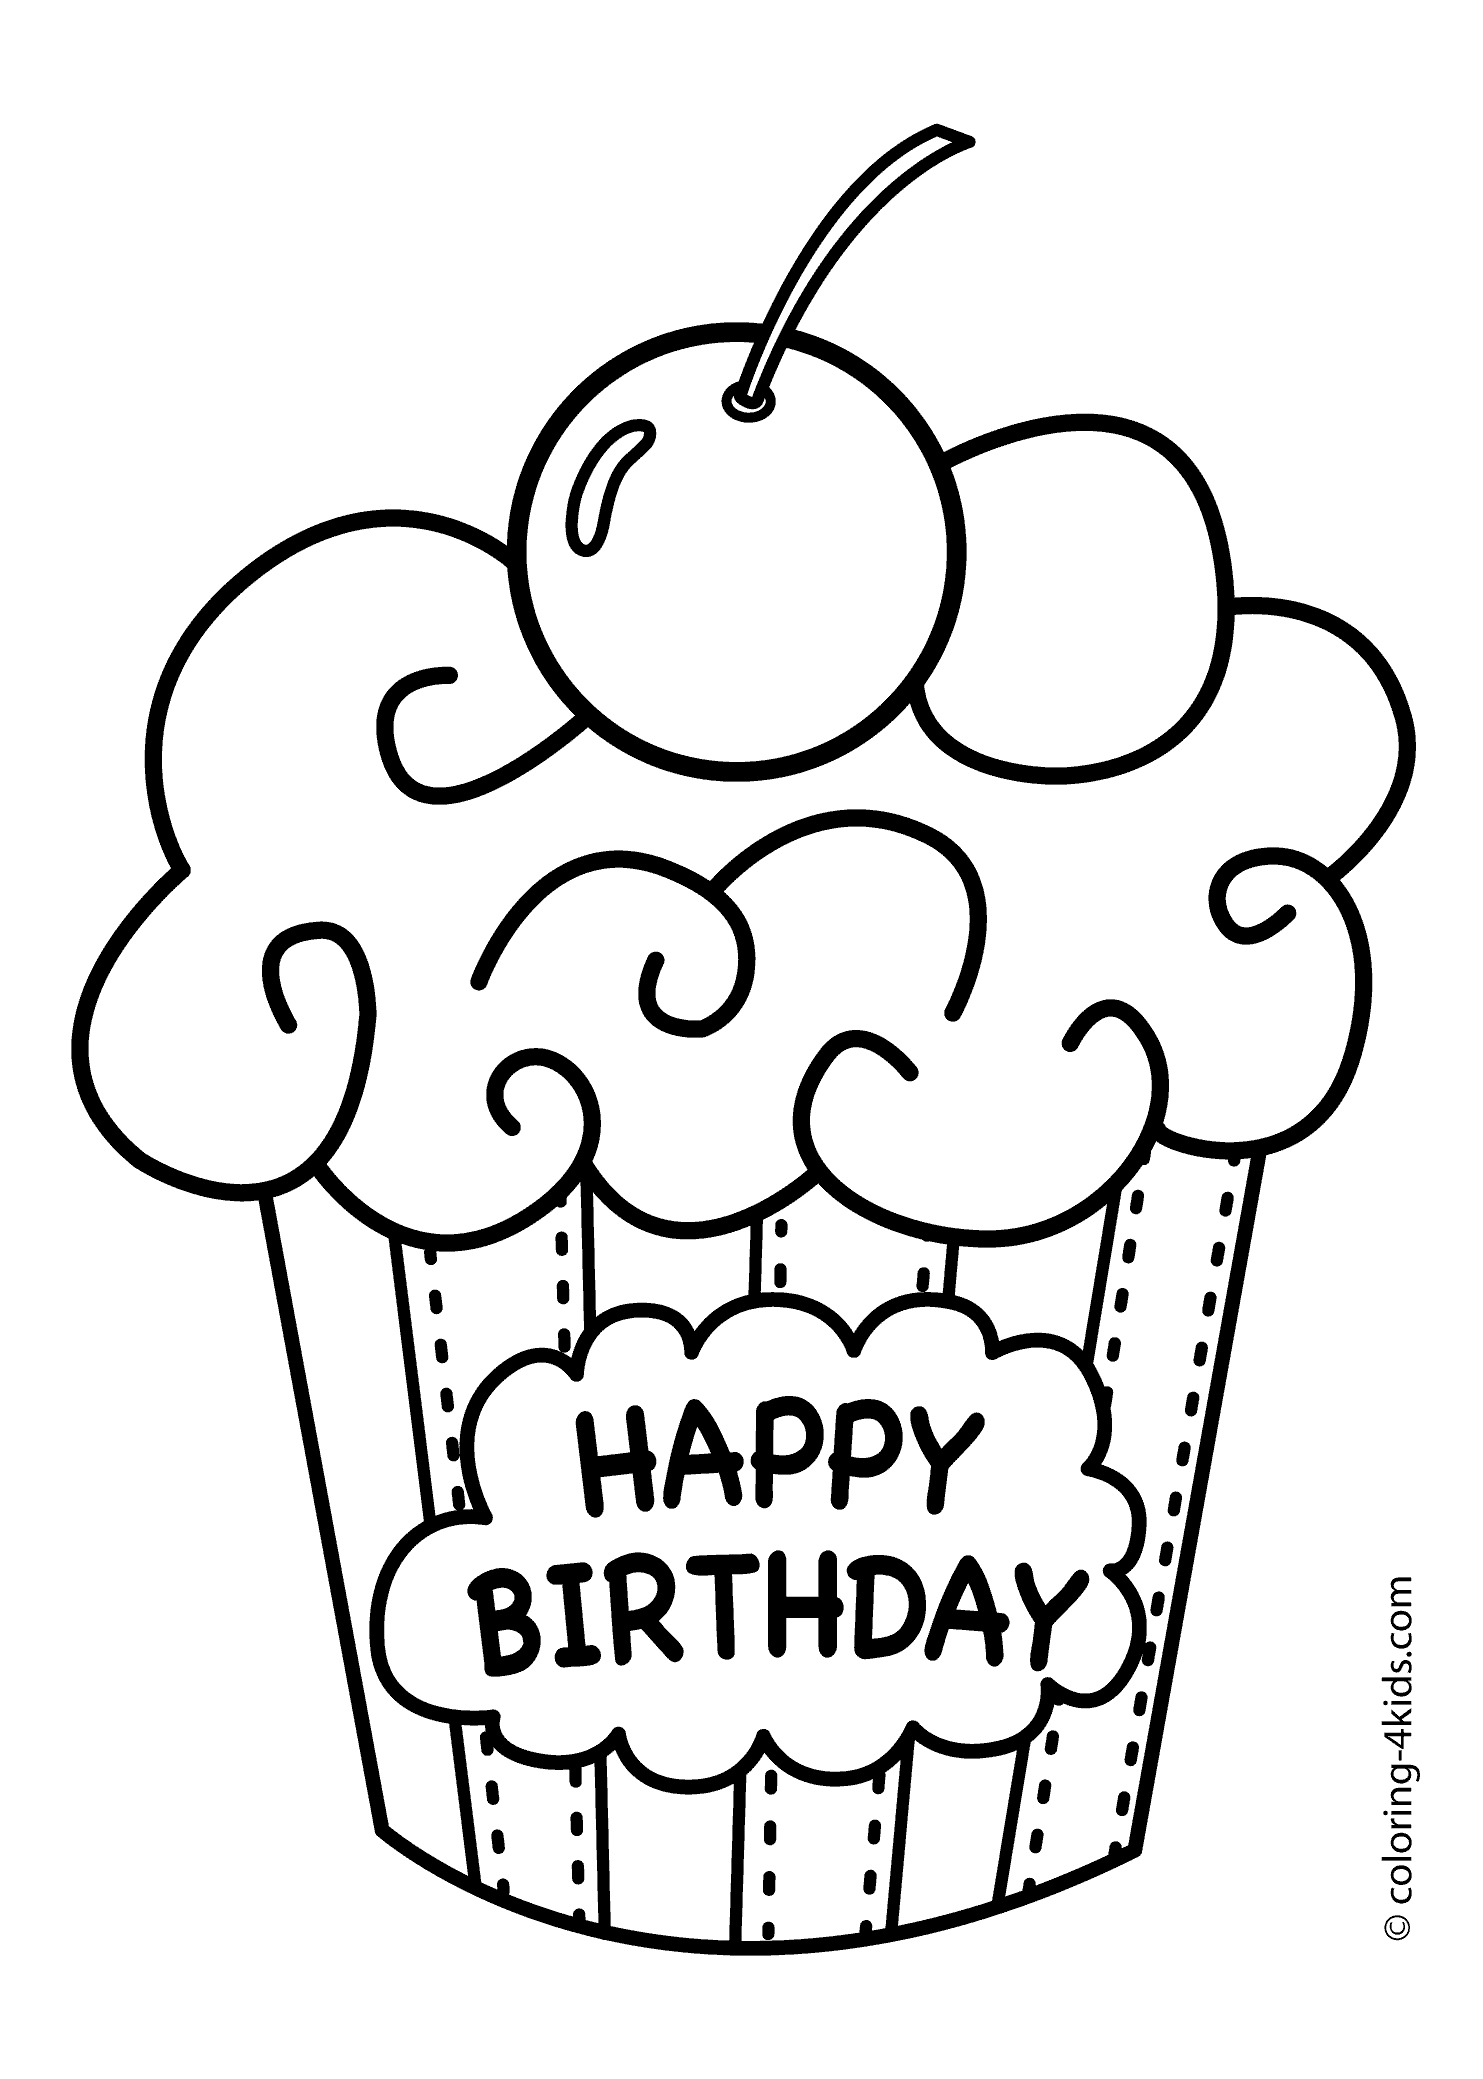 cake coloring page cake coloring pages getcoloringpagescom page cake coloring 